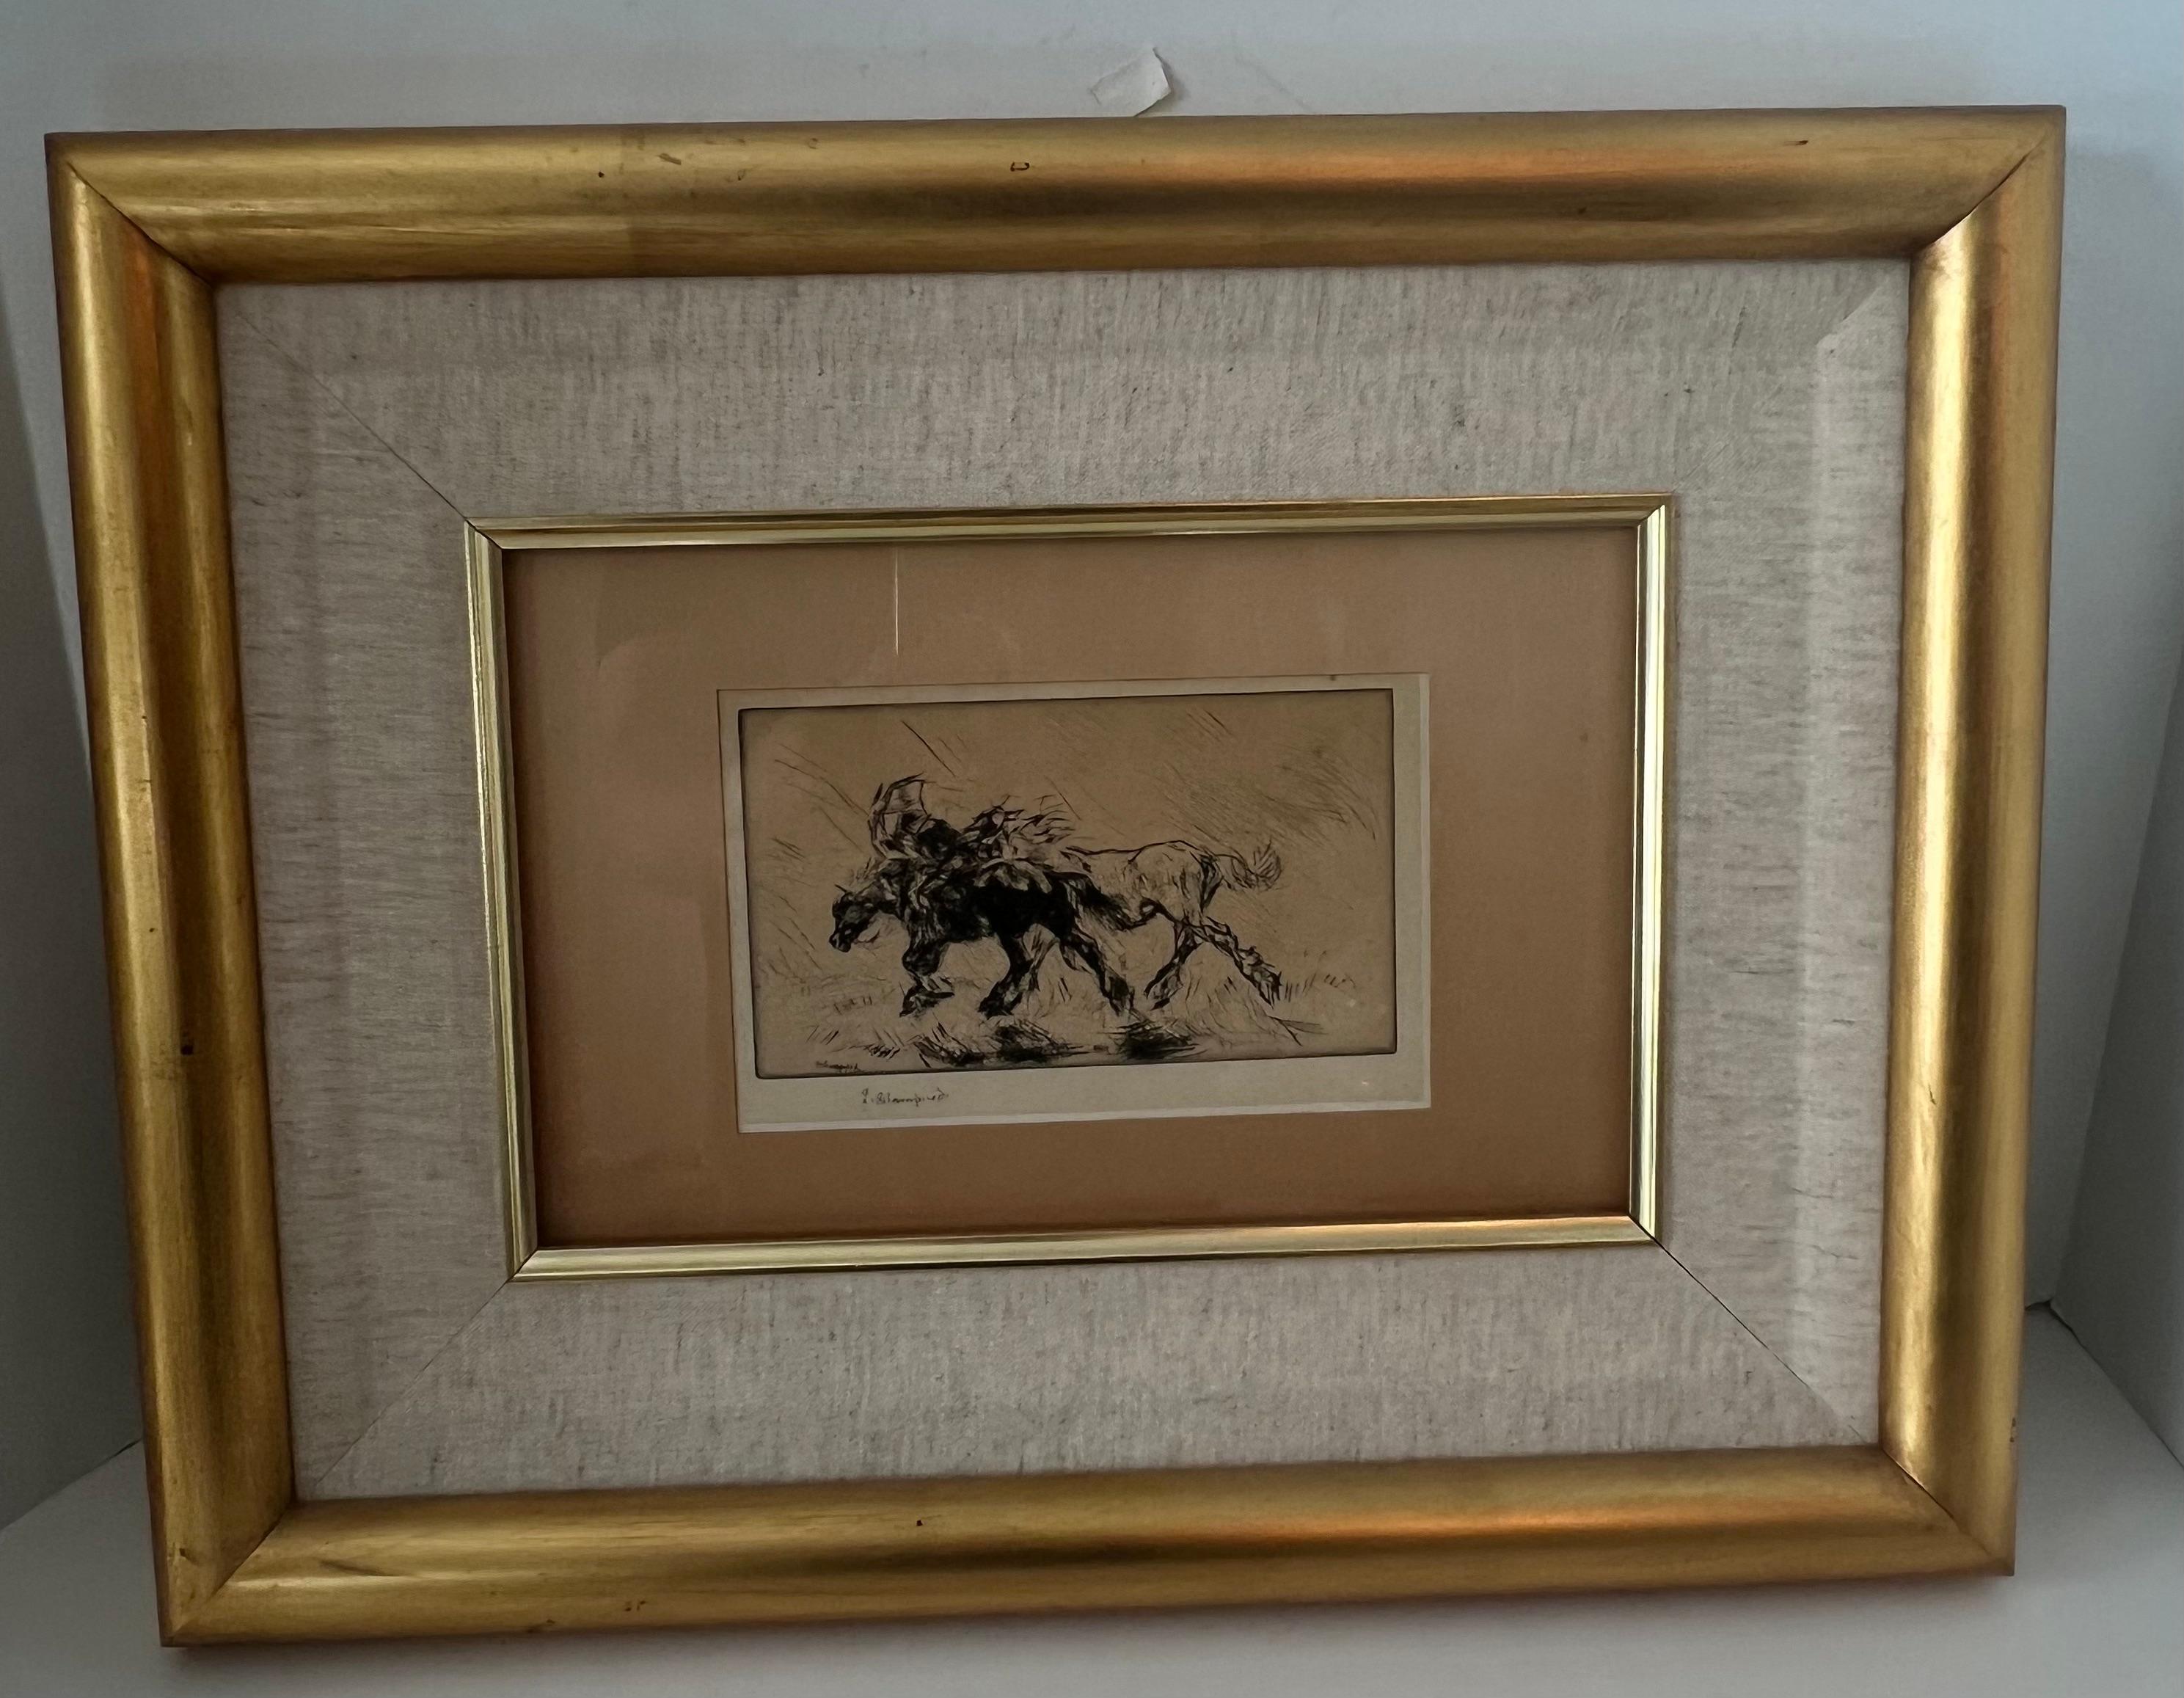  	Edmund Blampied Pen Drawing of a Horse Matted and Framed in Gilt Frame For Sale 6